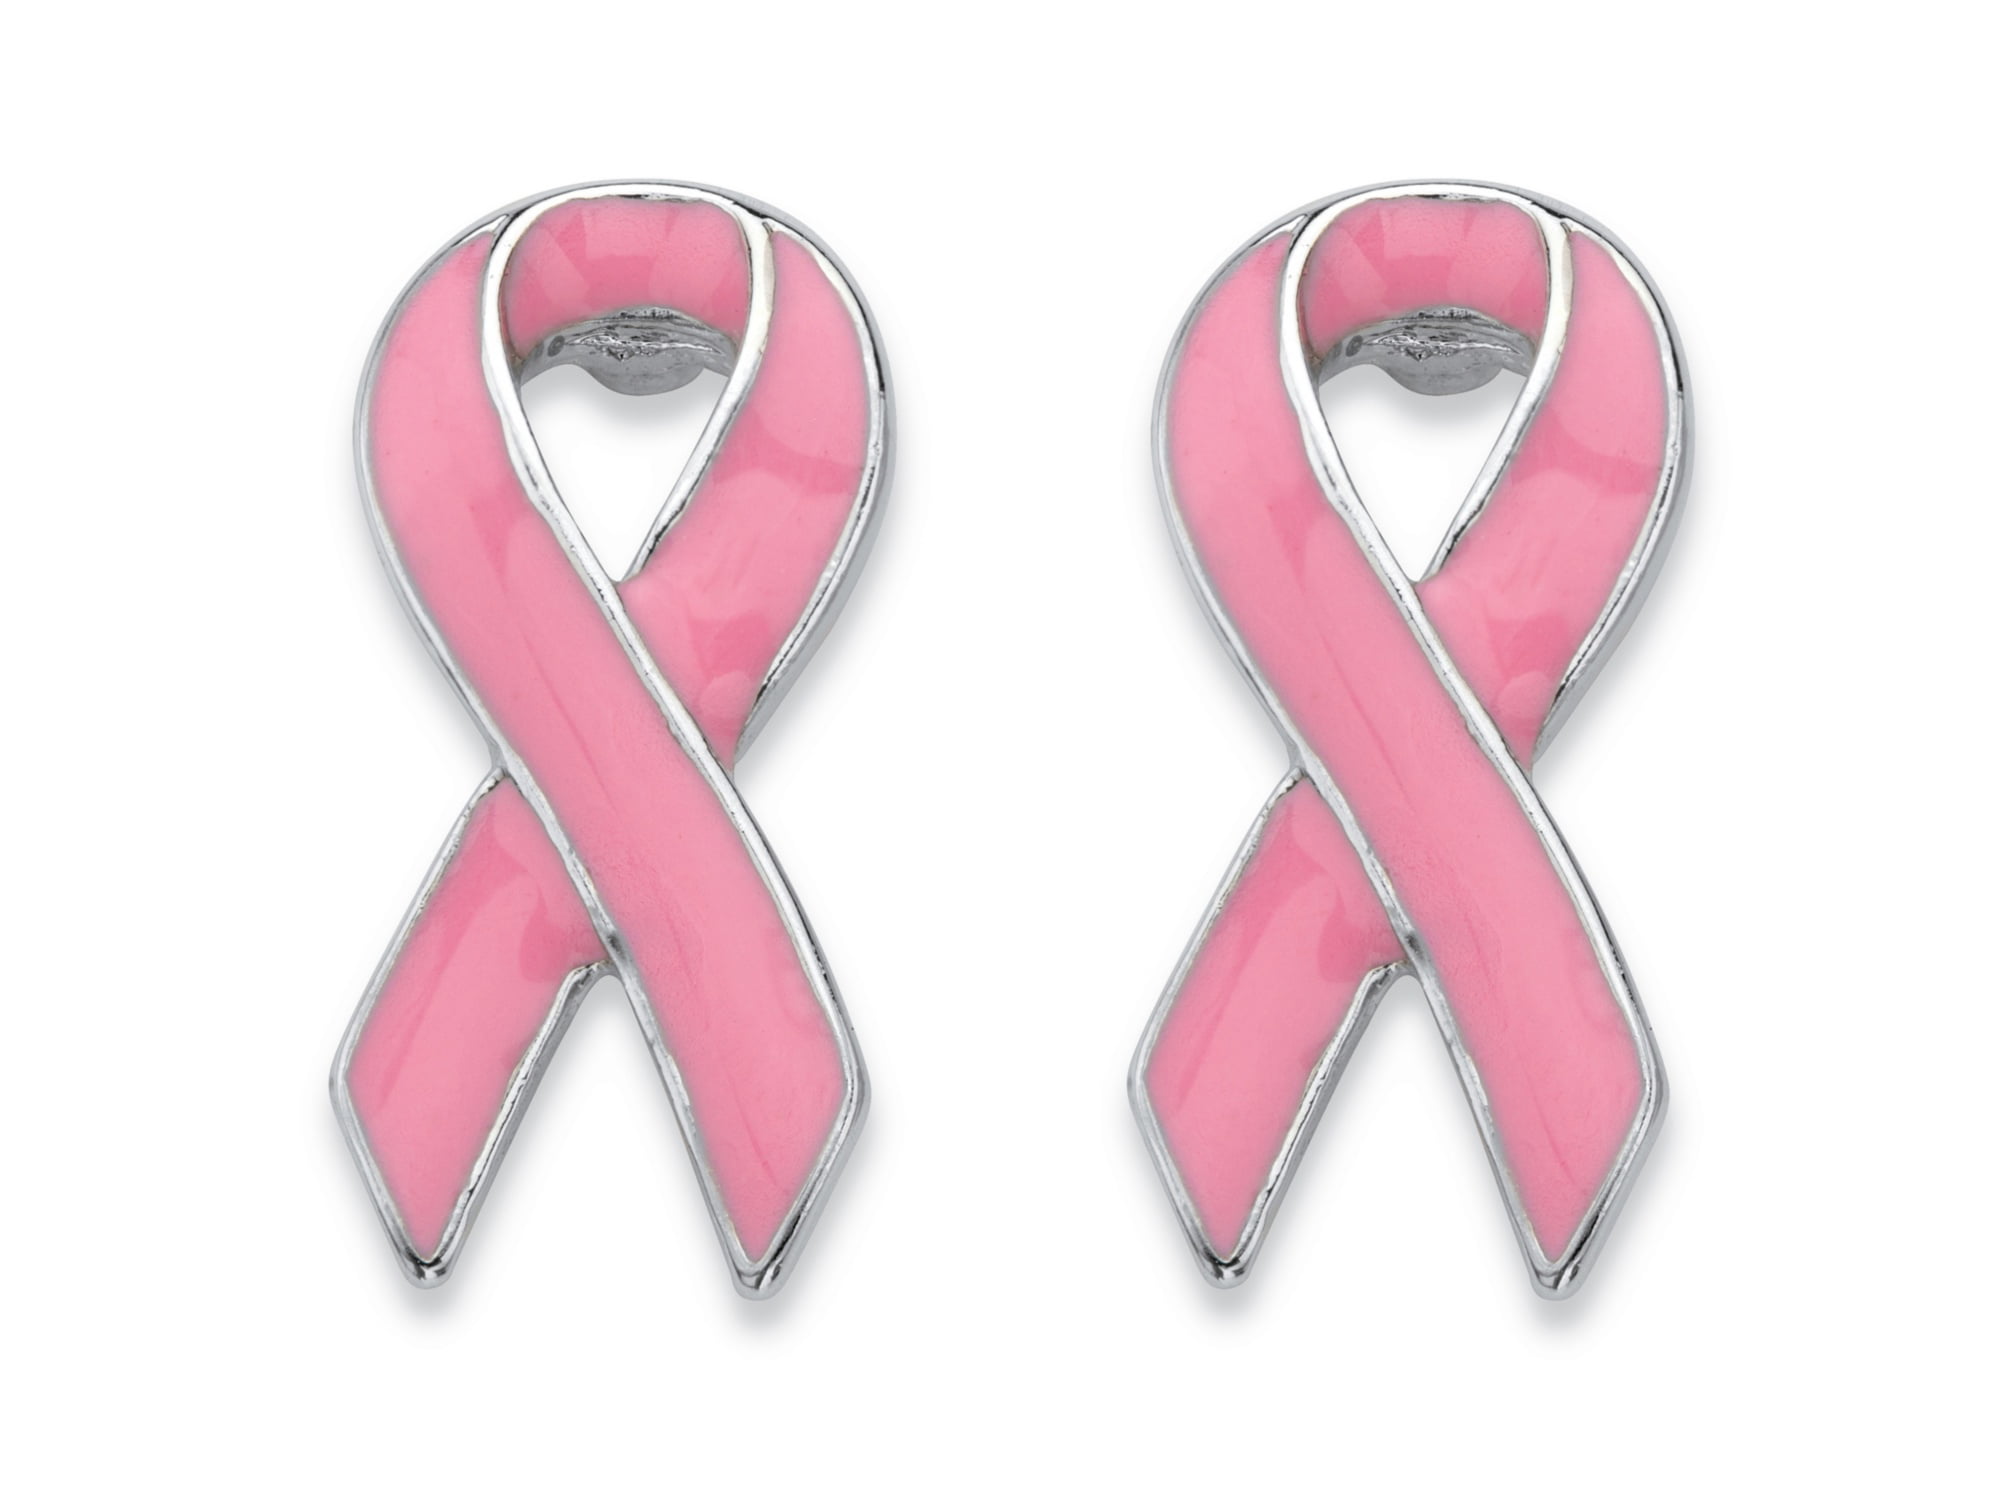 BOOKMARK PIN  U PICK PINK RIBBON BREAST CANCER AWARENESS EARRINGS NECKLACE 